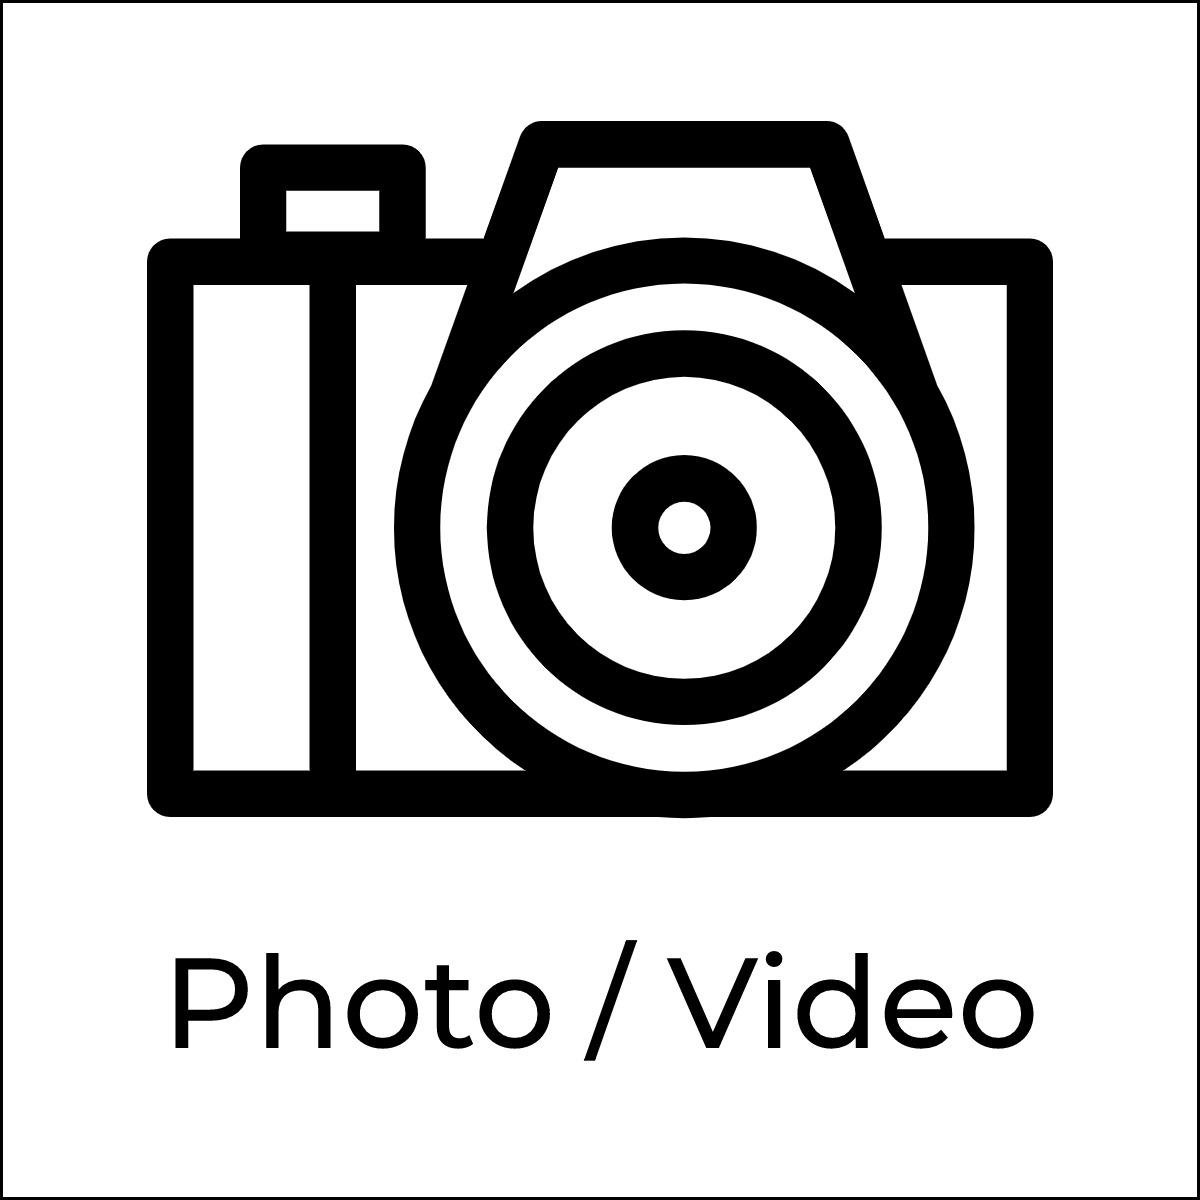 Photo Video services image